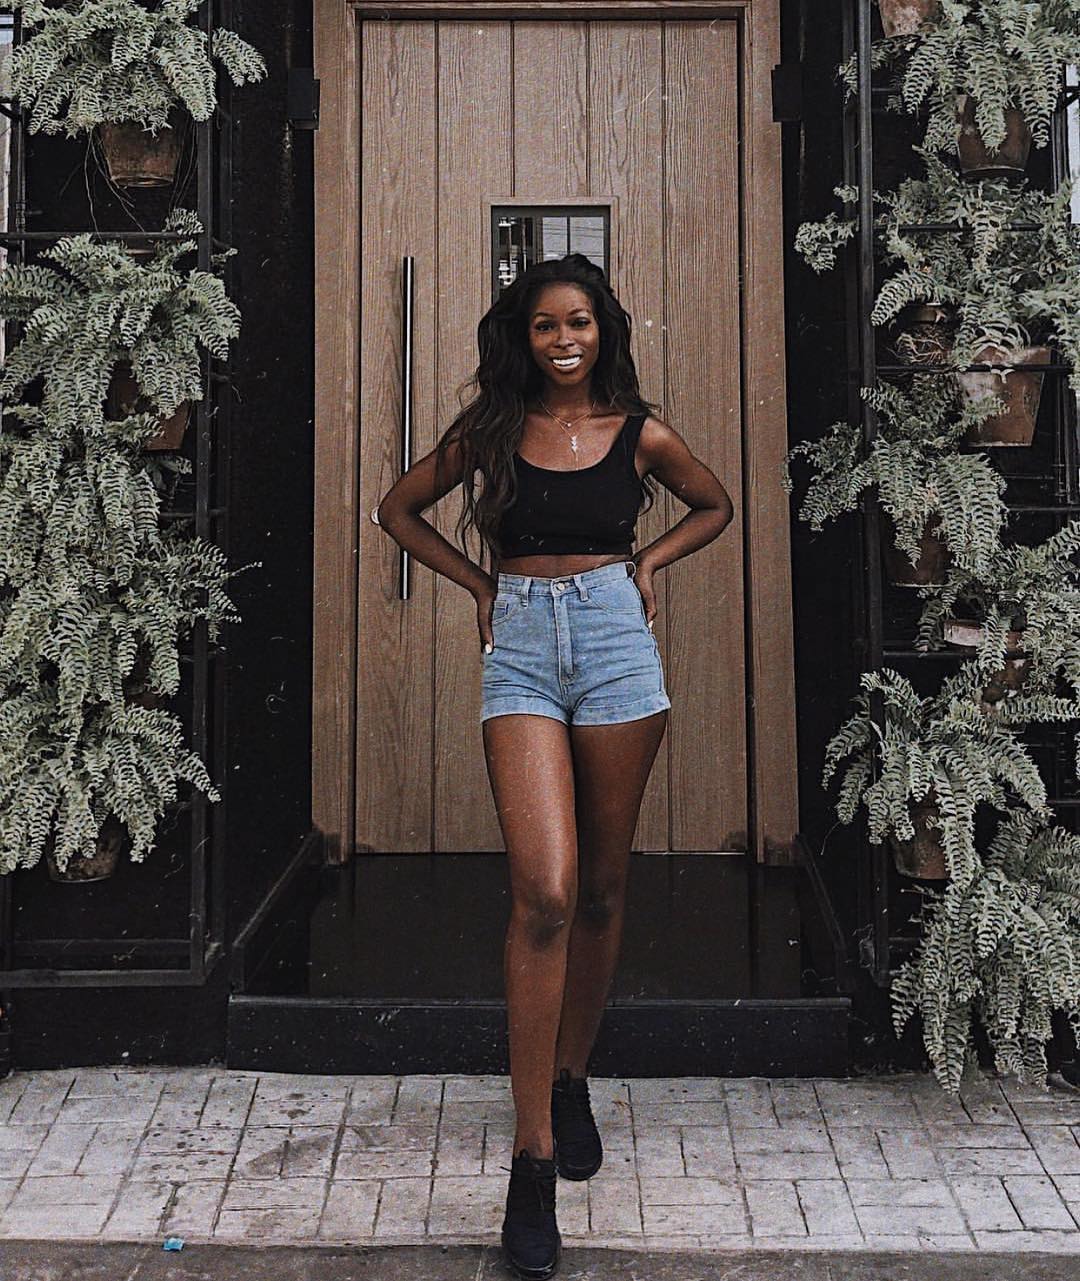 Black Crop Top And High Rise Denim Shorts
Outfit